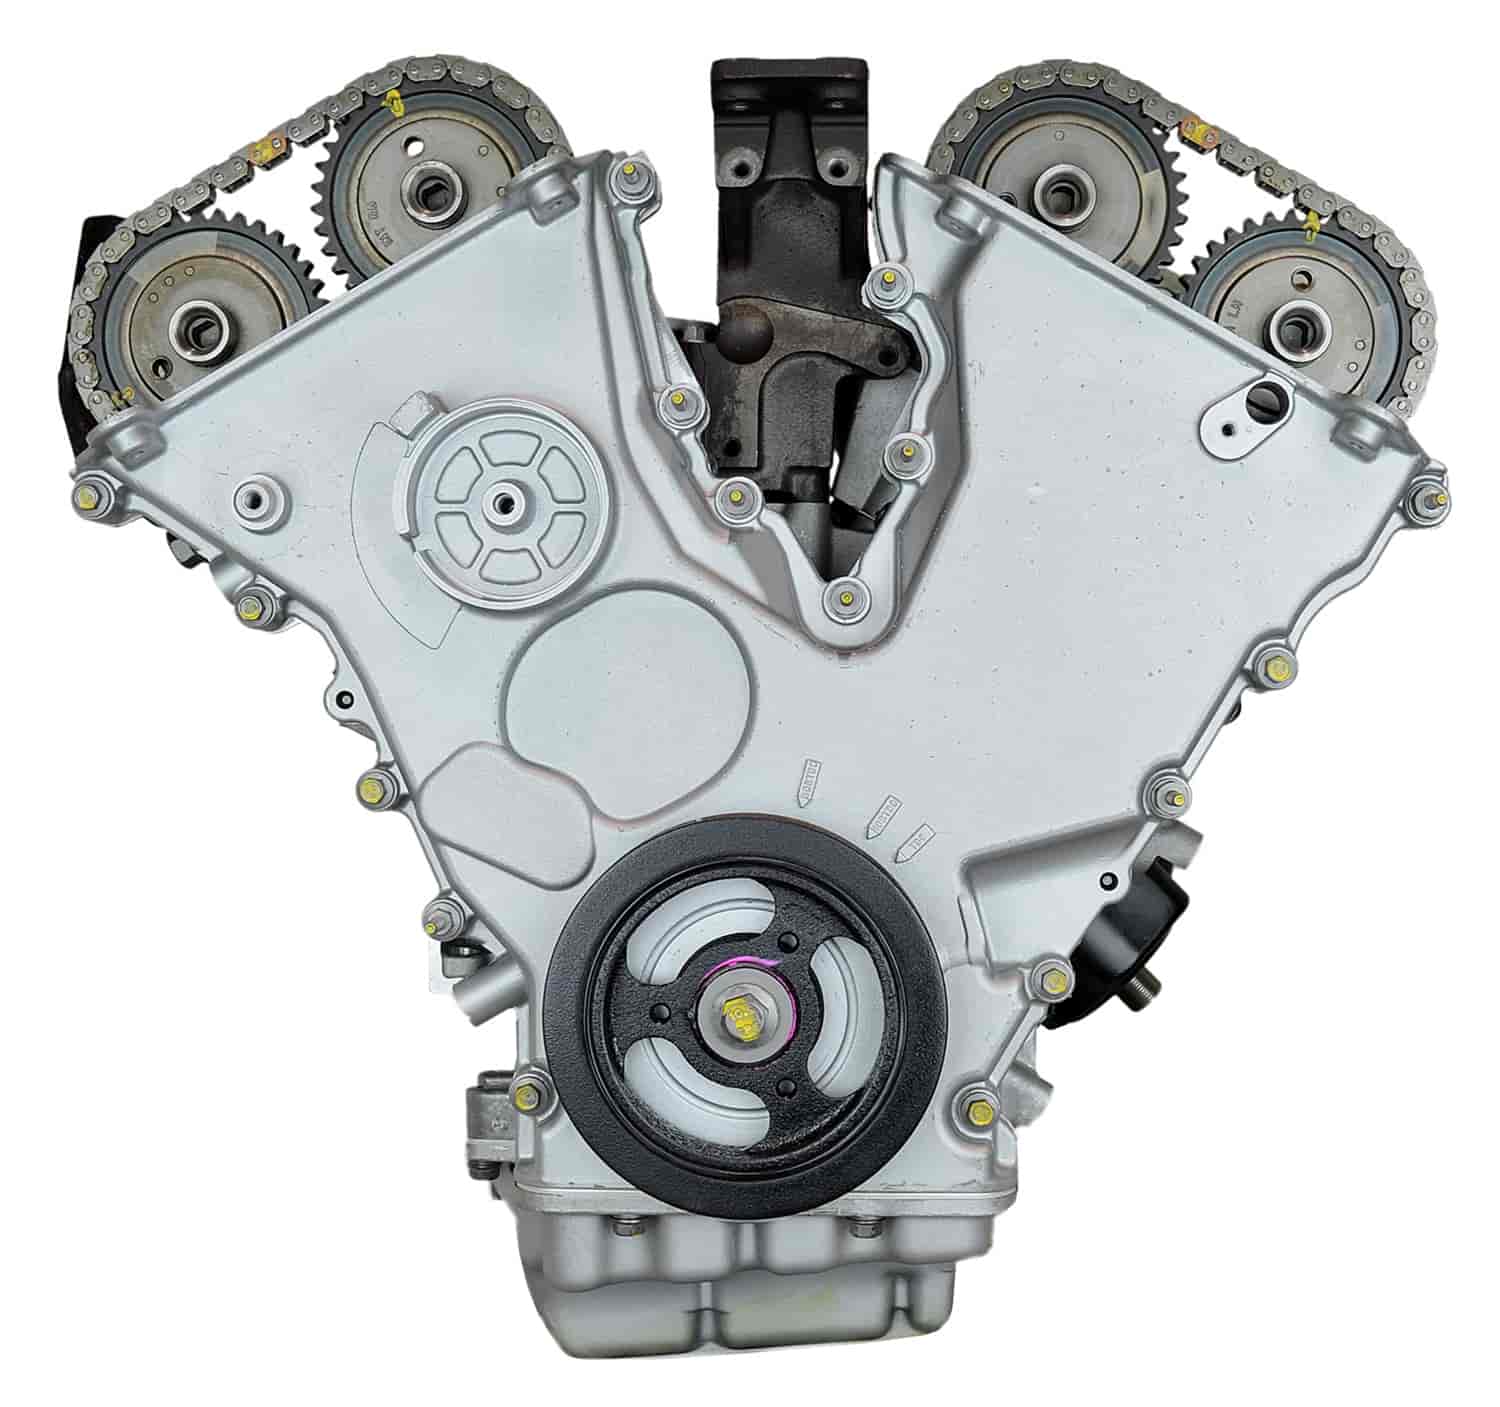 Remanufactured Crate Engine for 1998 Ford Contour SVT